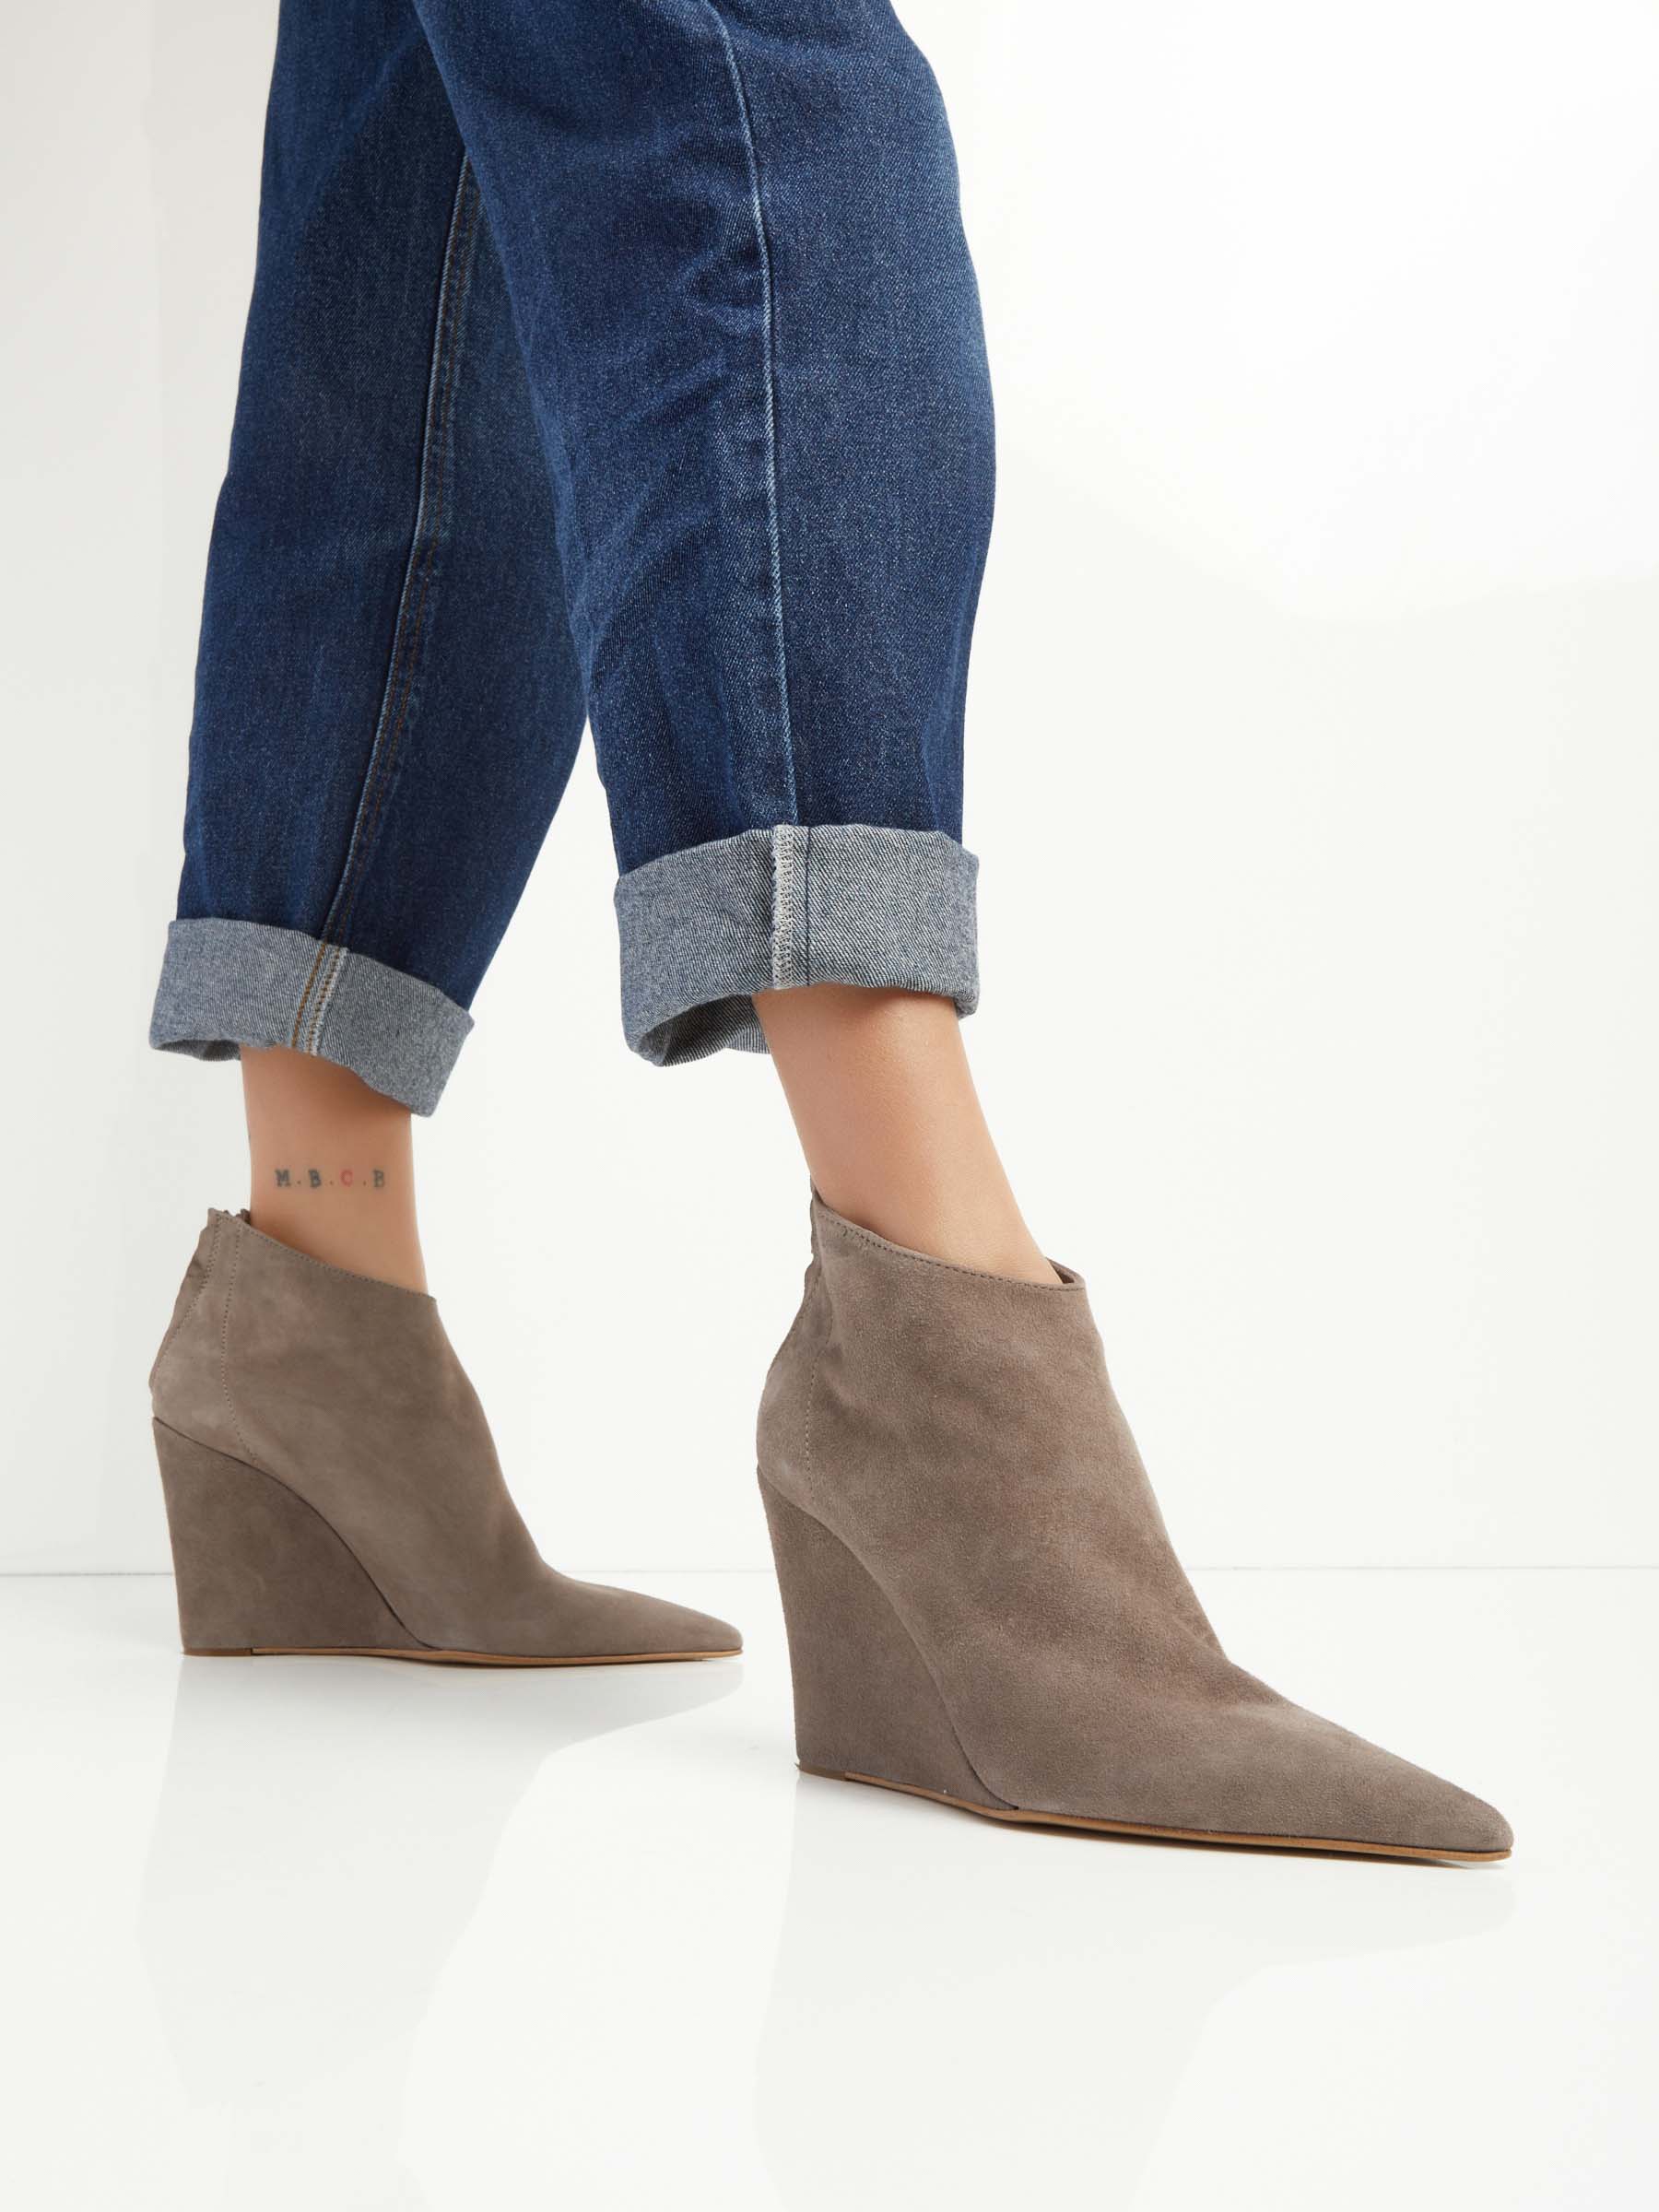 Wedge Leather Ankle Boots F0545554-0468 Negozio Online